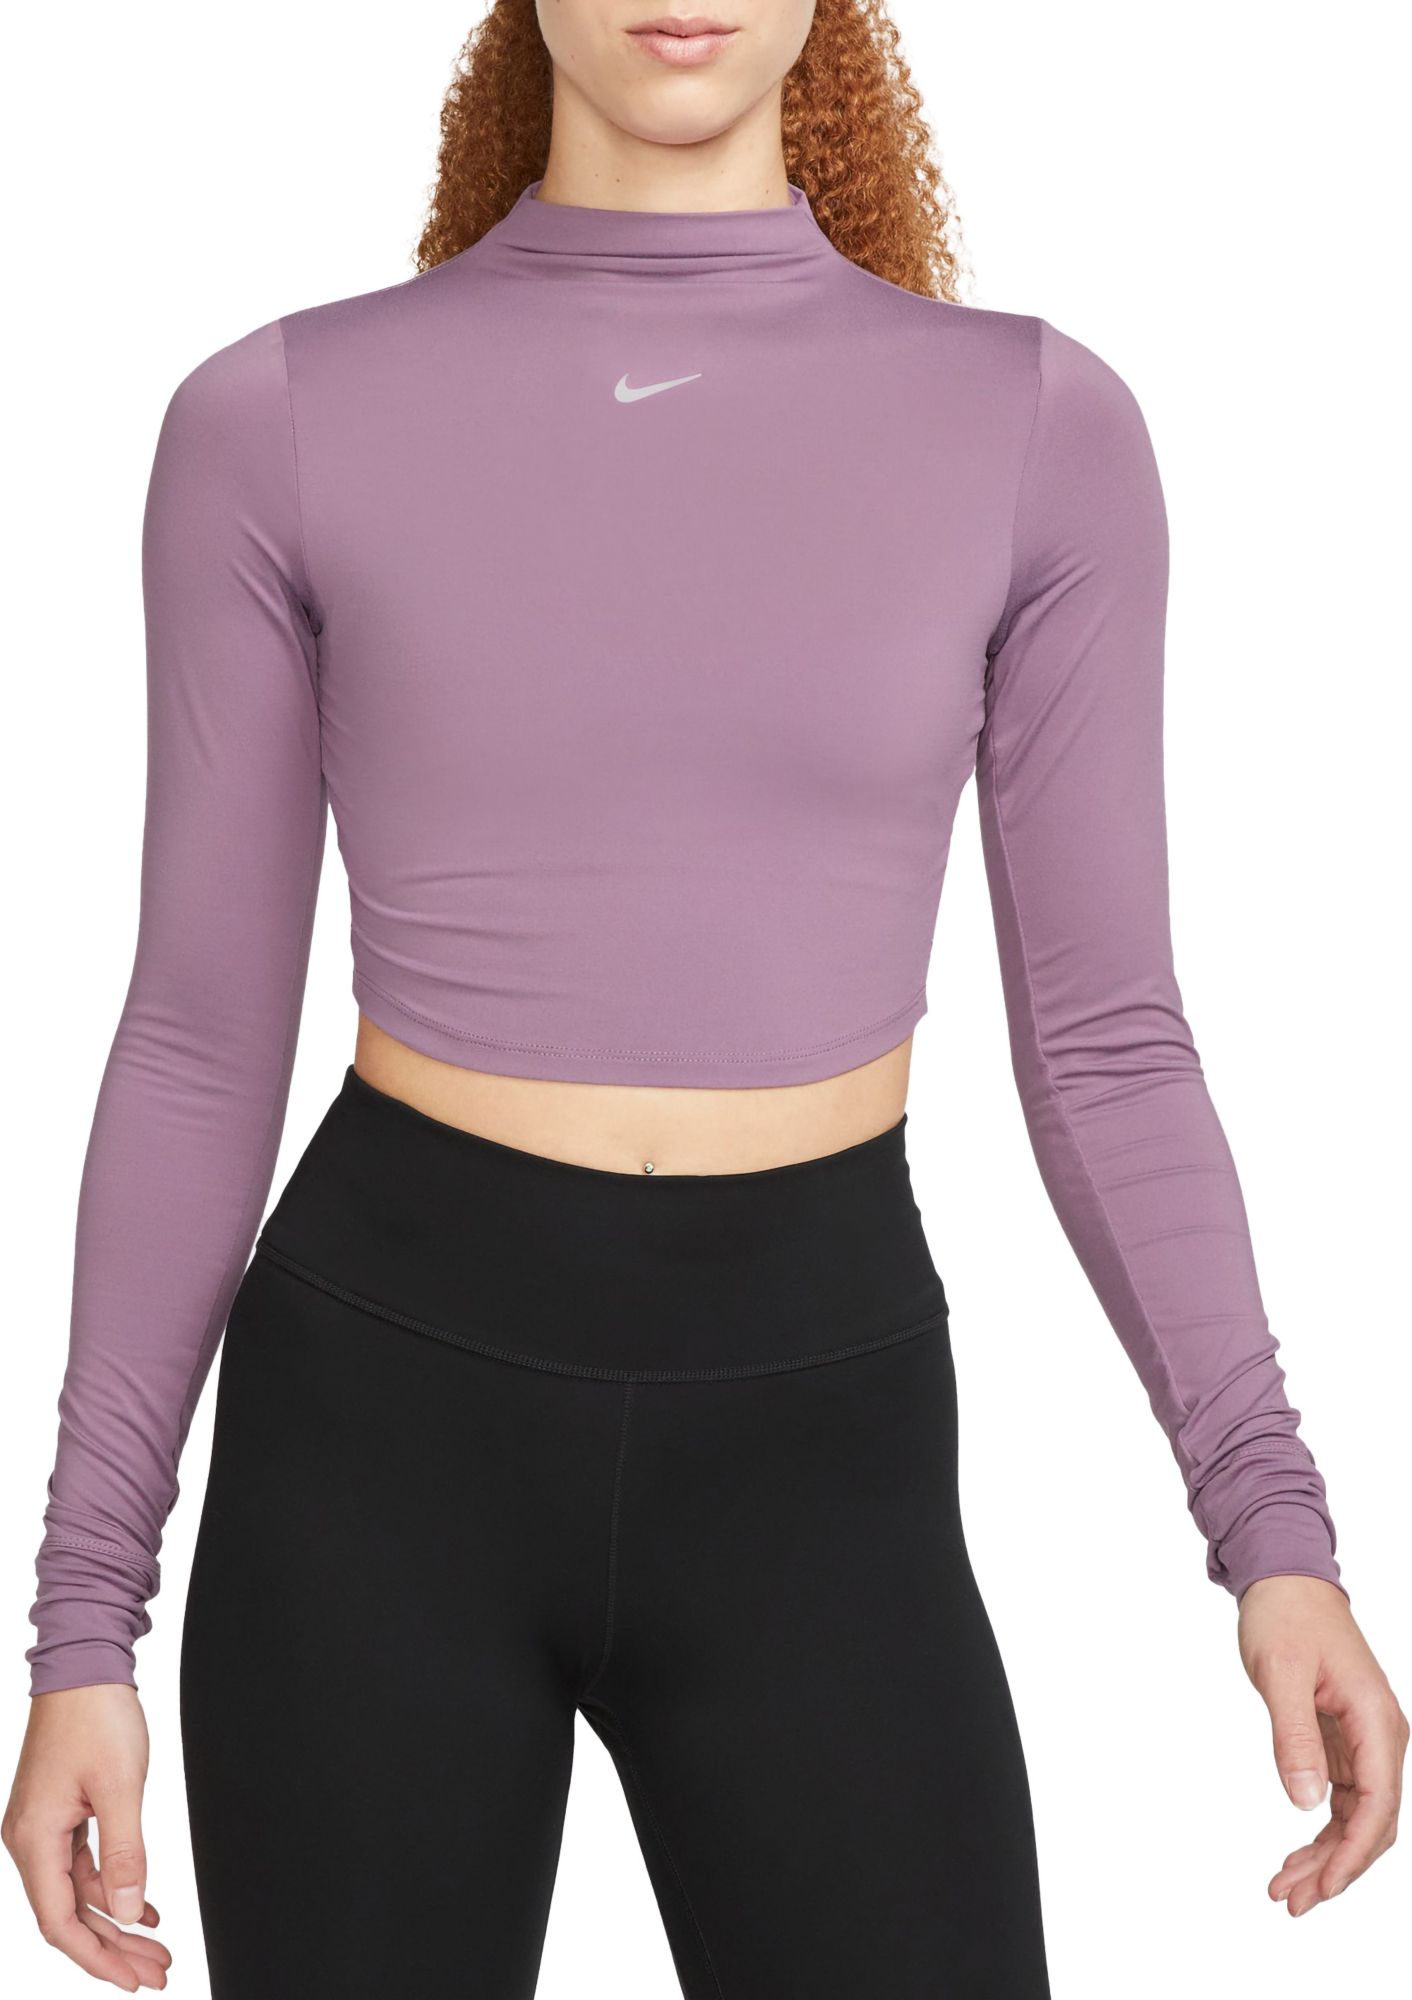 NIKE WOMEN'S ONE DRI-FIT LUXE LONG SLEEVE CROPPED TOP INTERNATIONAL SHIPPING